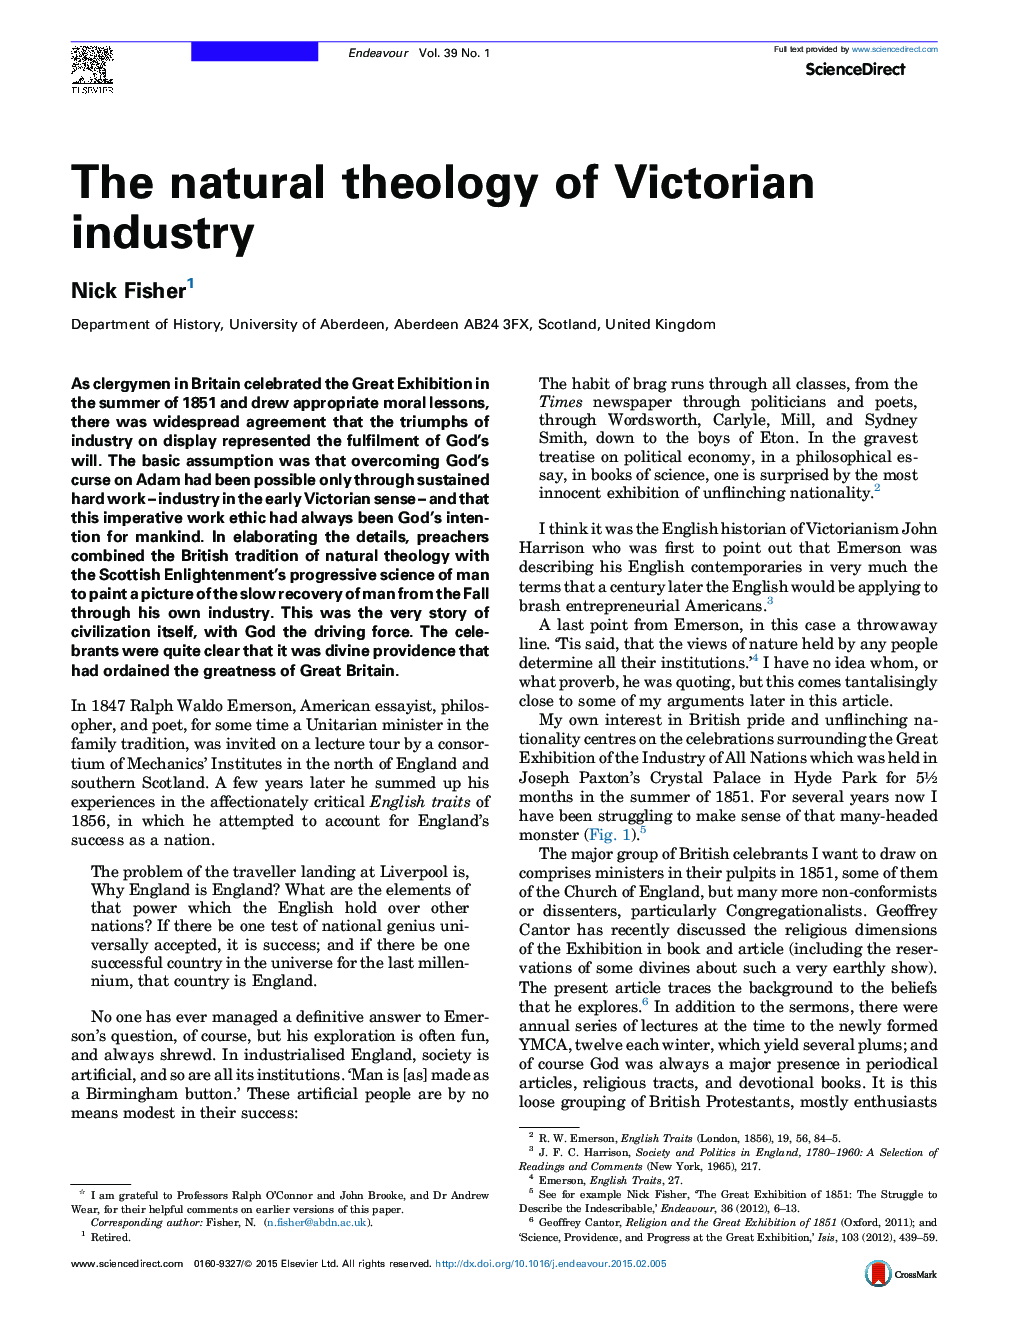 The natural theology of Victorian industry 